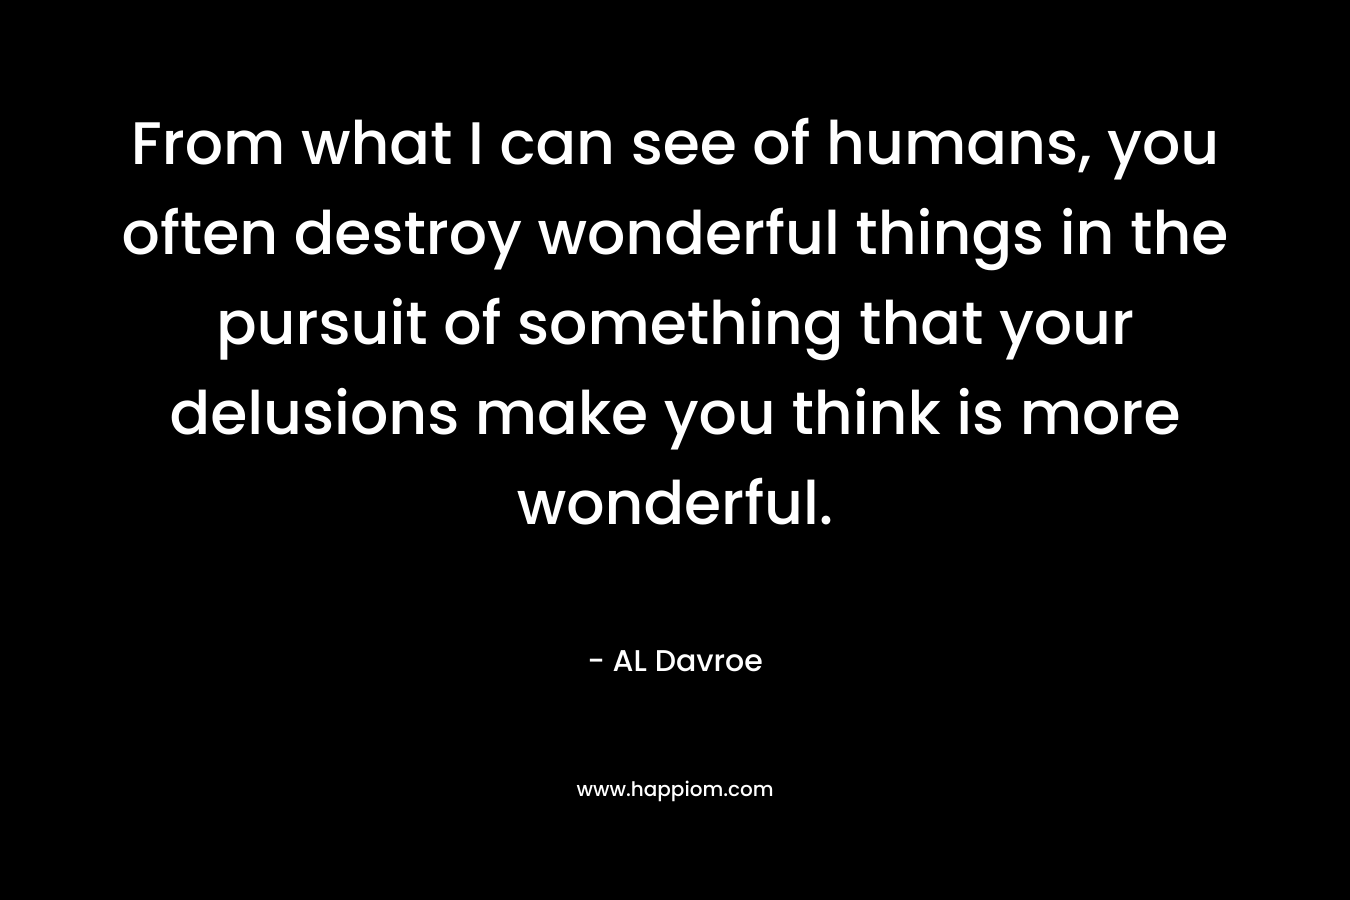 From what I can see of humans, you often destroy wonderful things in the pursuit of something that your delusions make you think is more wonderful.